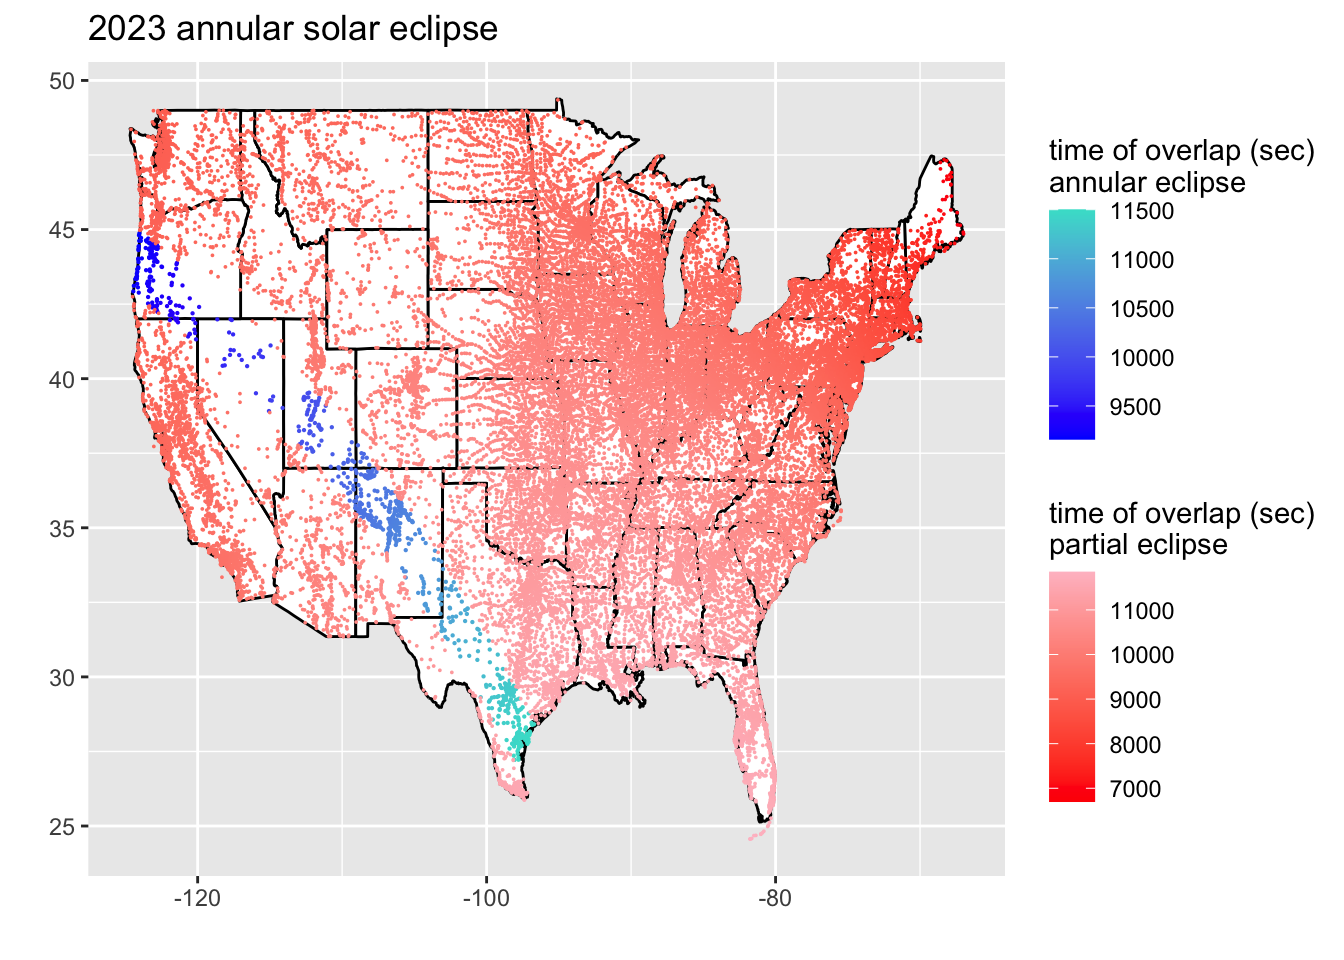 A map of the United States where points are plotted for each city. Each point is colored based on the amount of time the eclipse is happening. That is, the total time the moon contacts the sun at all. The duration of the eclipse depends on both the longitude (basically the distance from the path of the full eclipse) and the latitude (the distance from the equator).